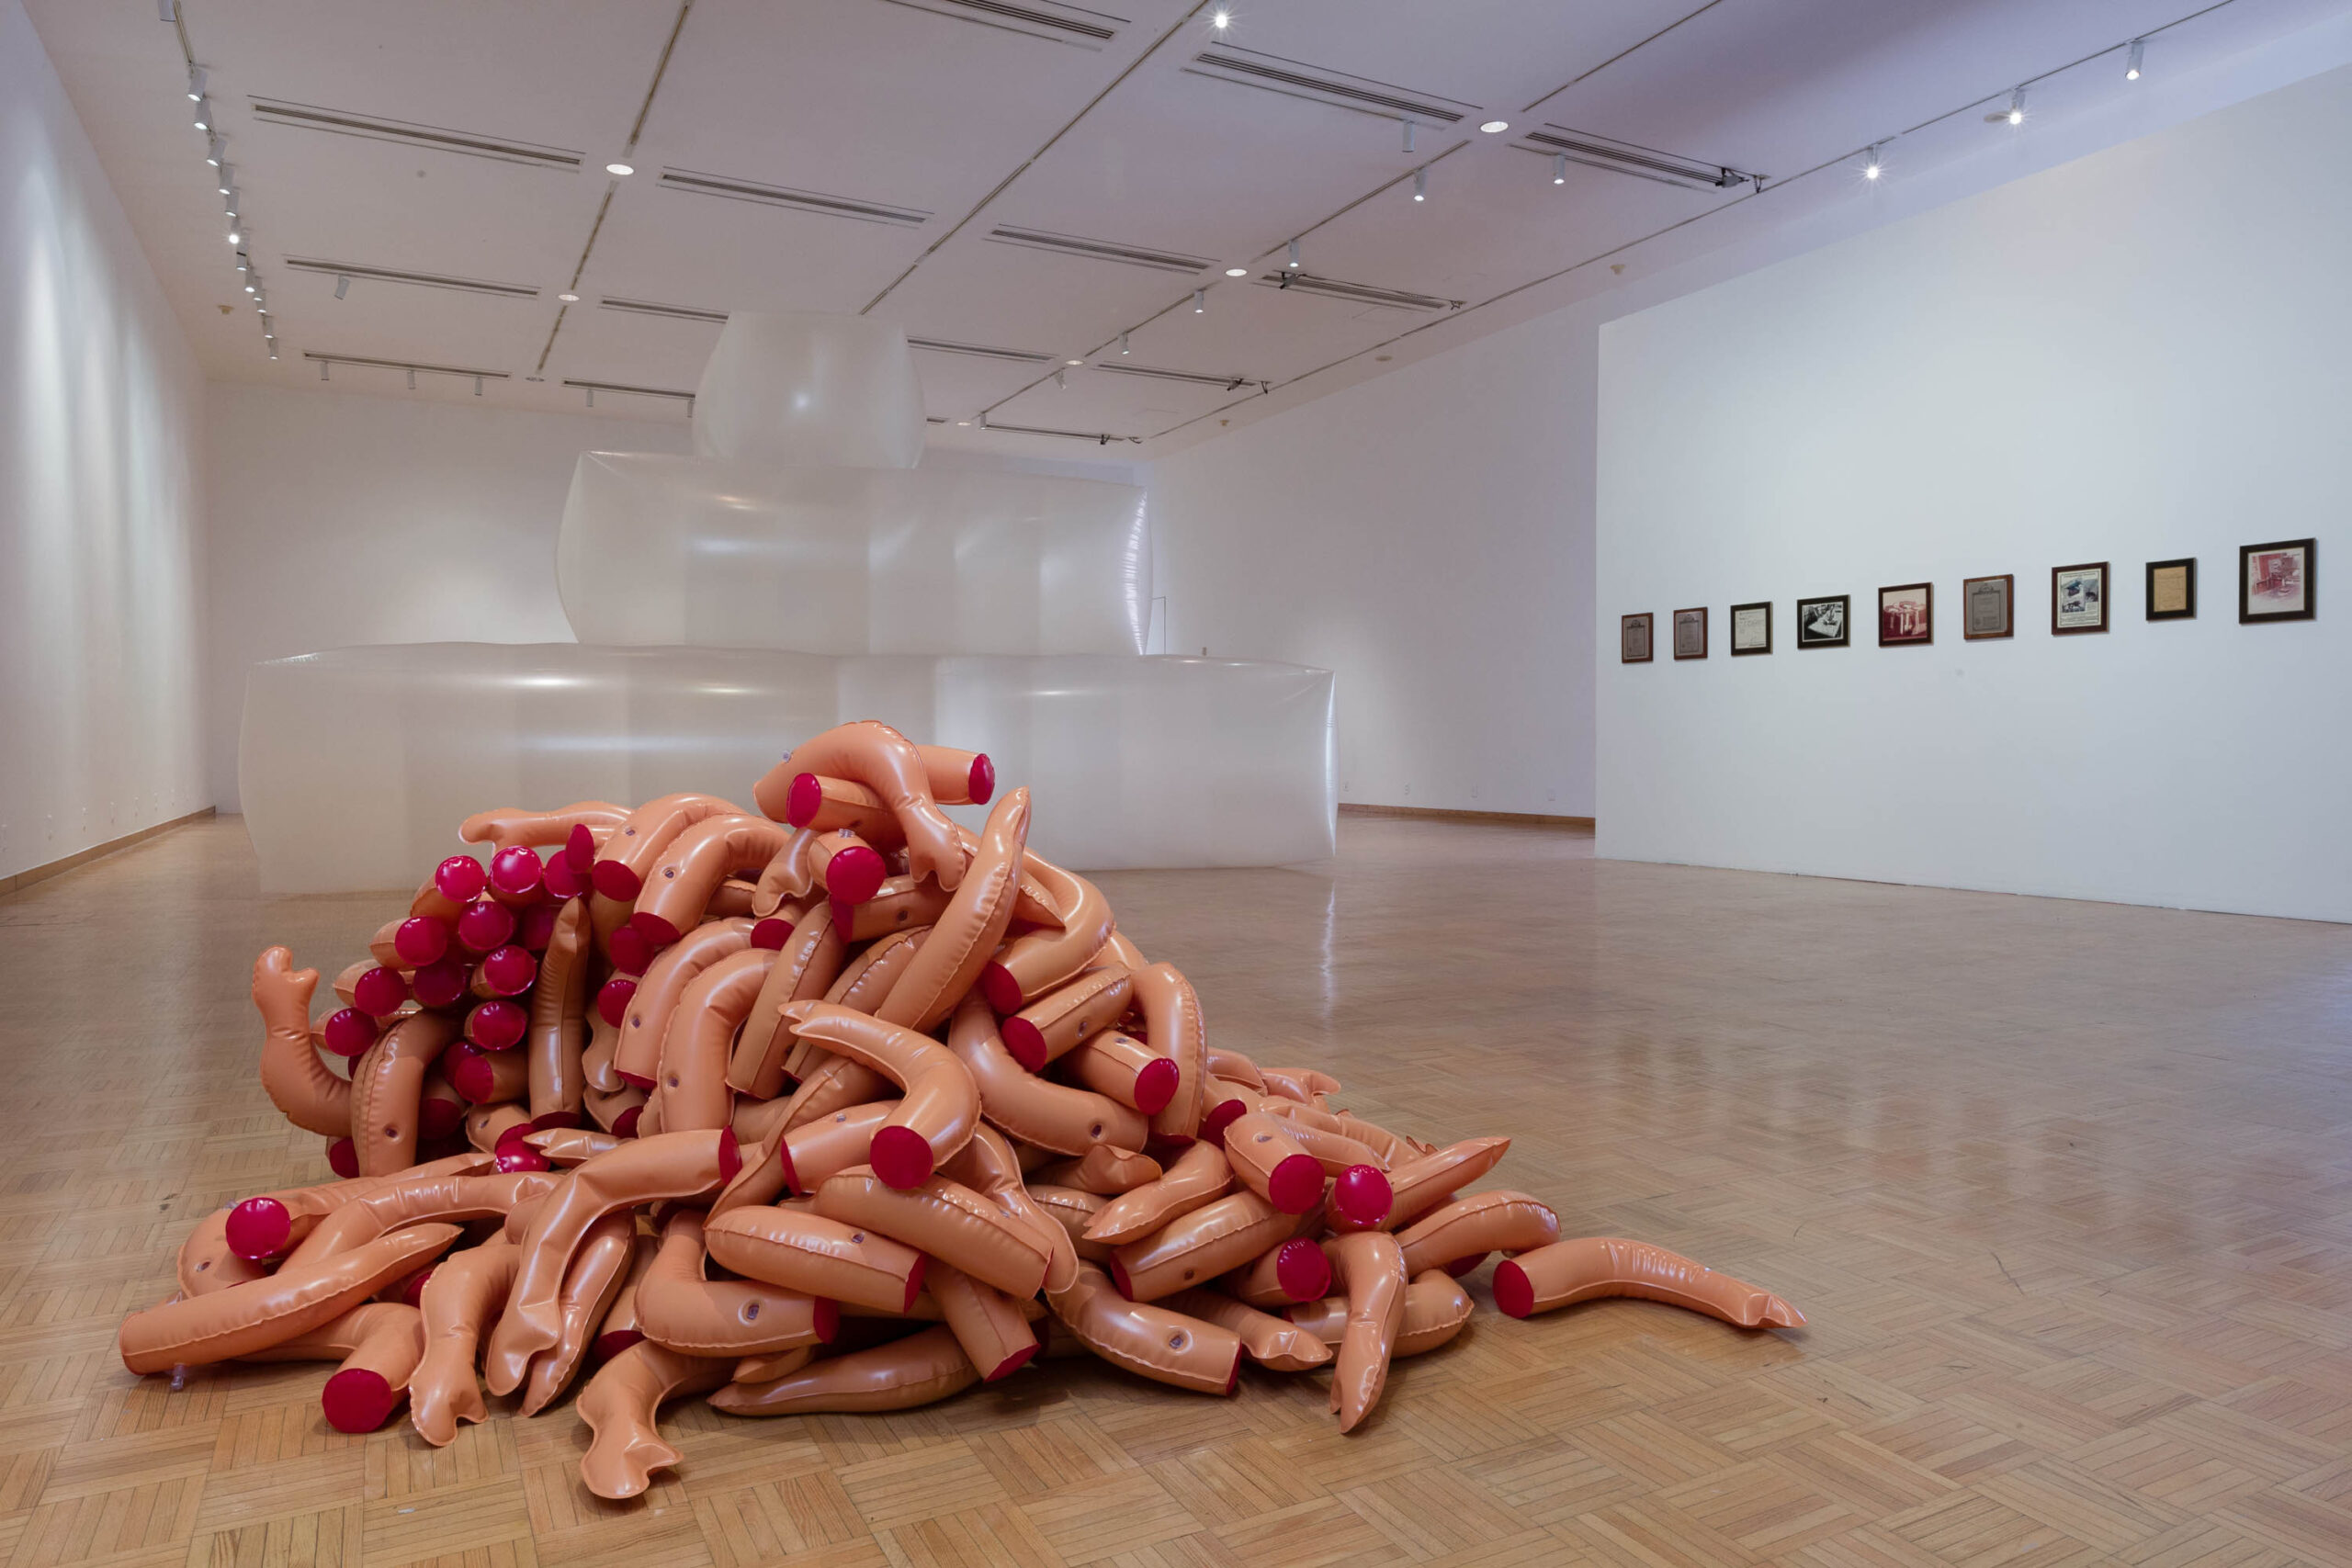 A contemporary art installation featuring a pile of sculptures resembling pink appendages in the foreground, with semi-transparent structures and framed artworks on the wall in the background, within a gallery space.